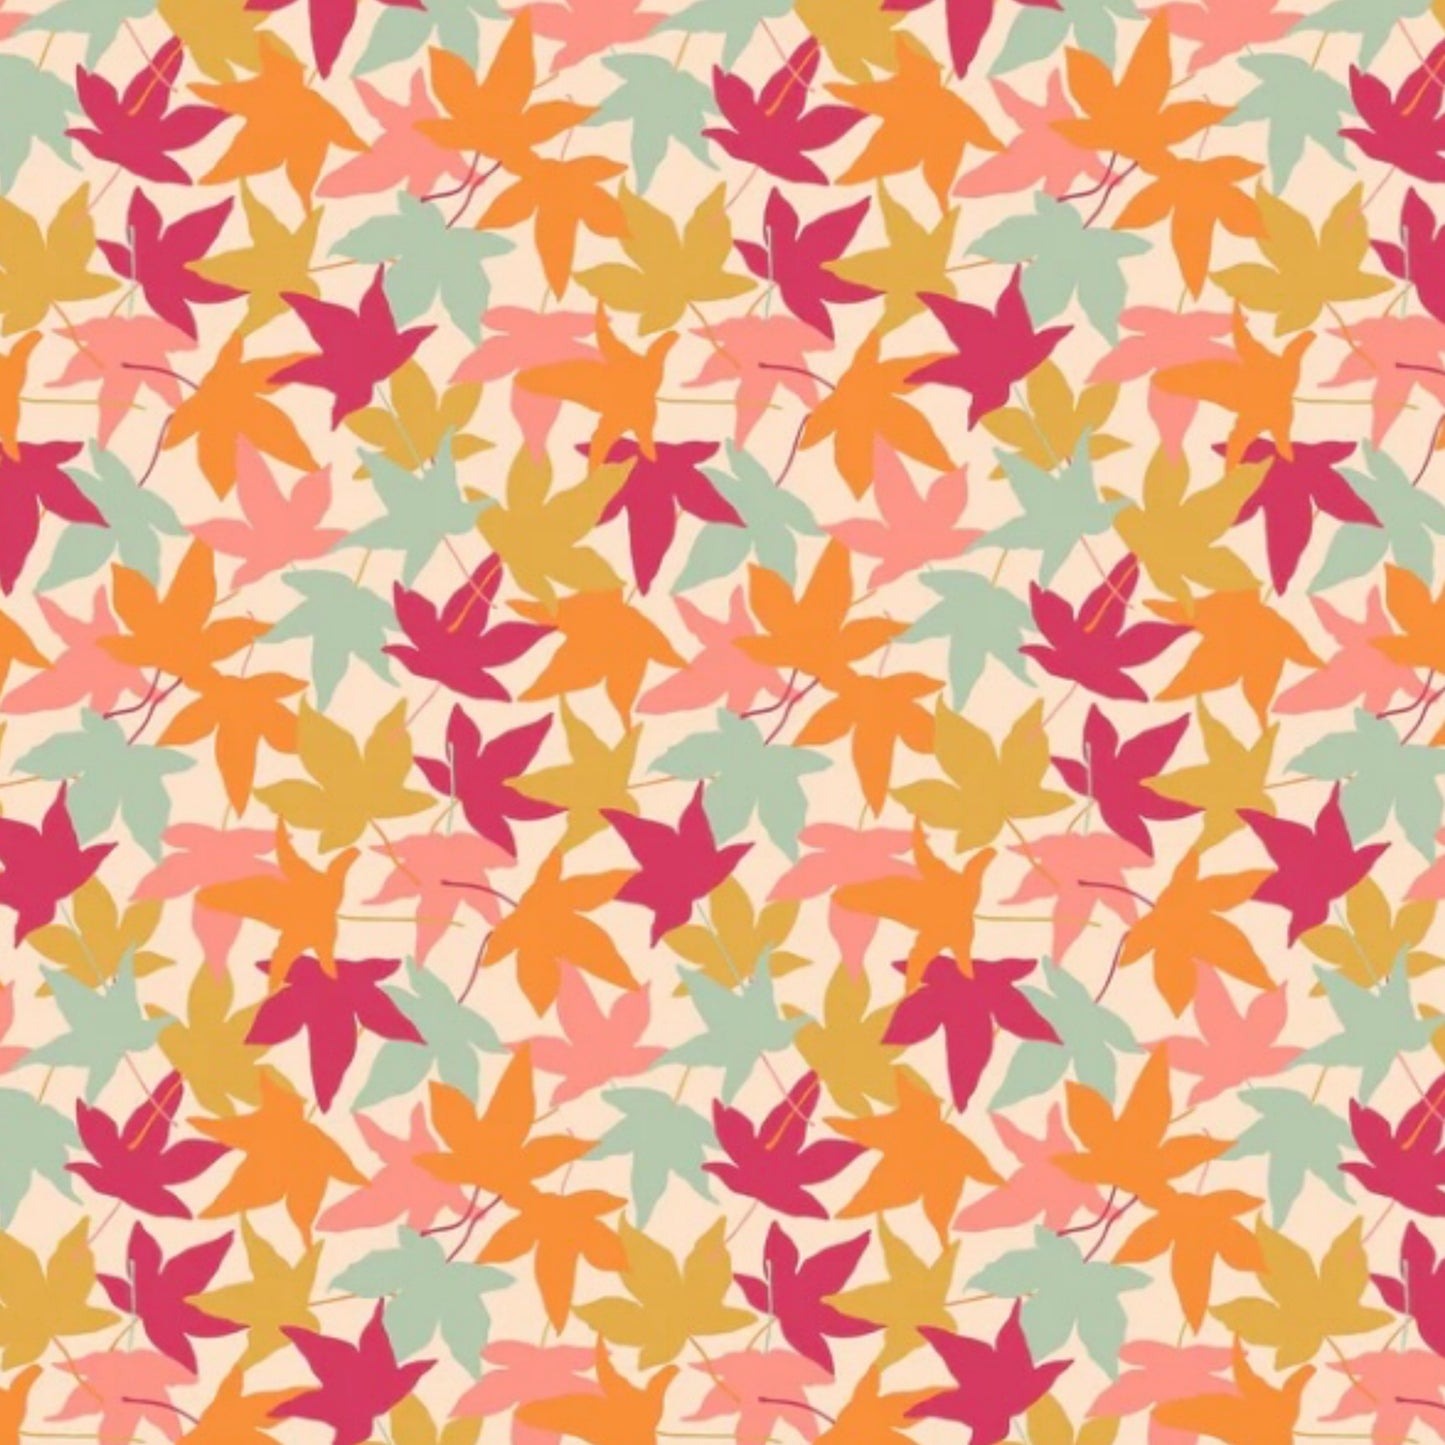 Leaves - Autumn Leaves from the Splendor Collection by Pippa Shaw for Figo Fabrics